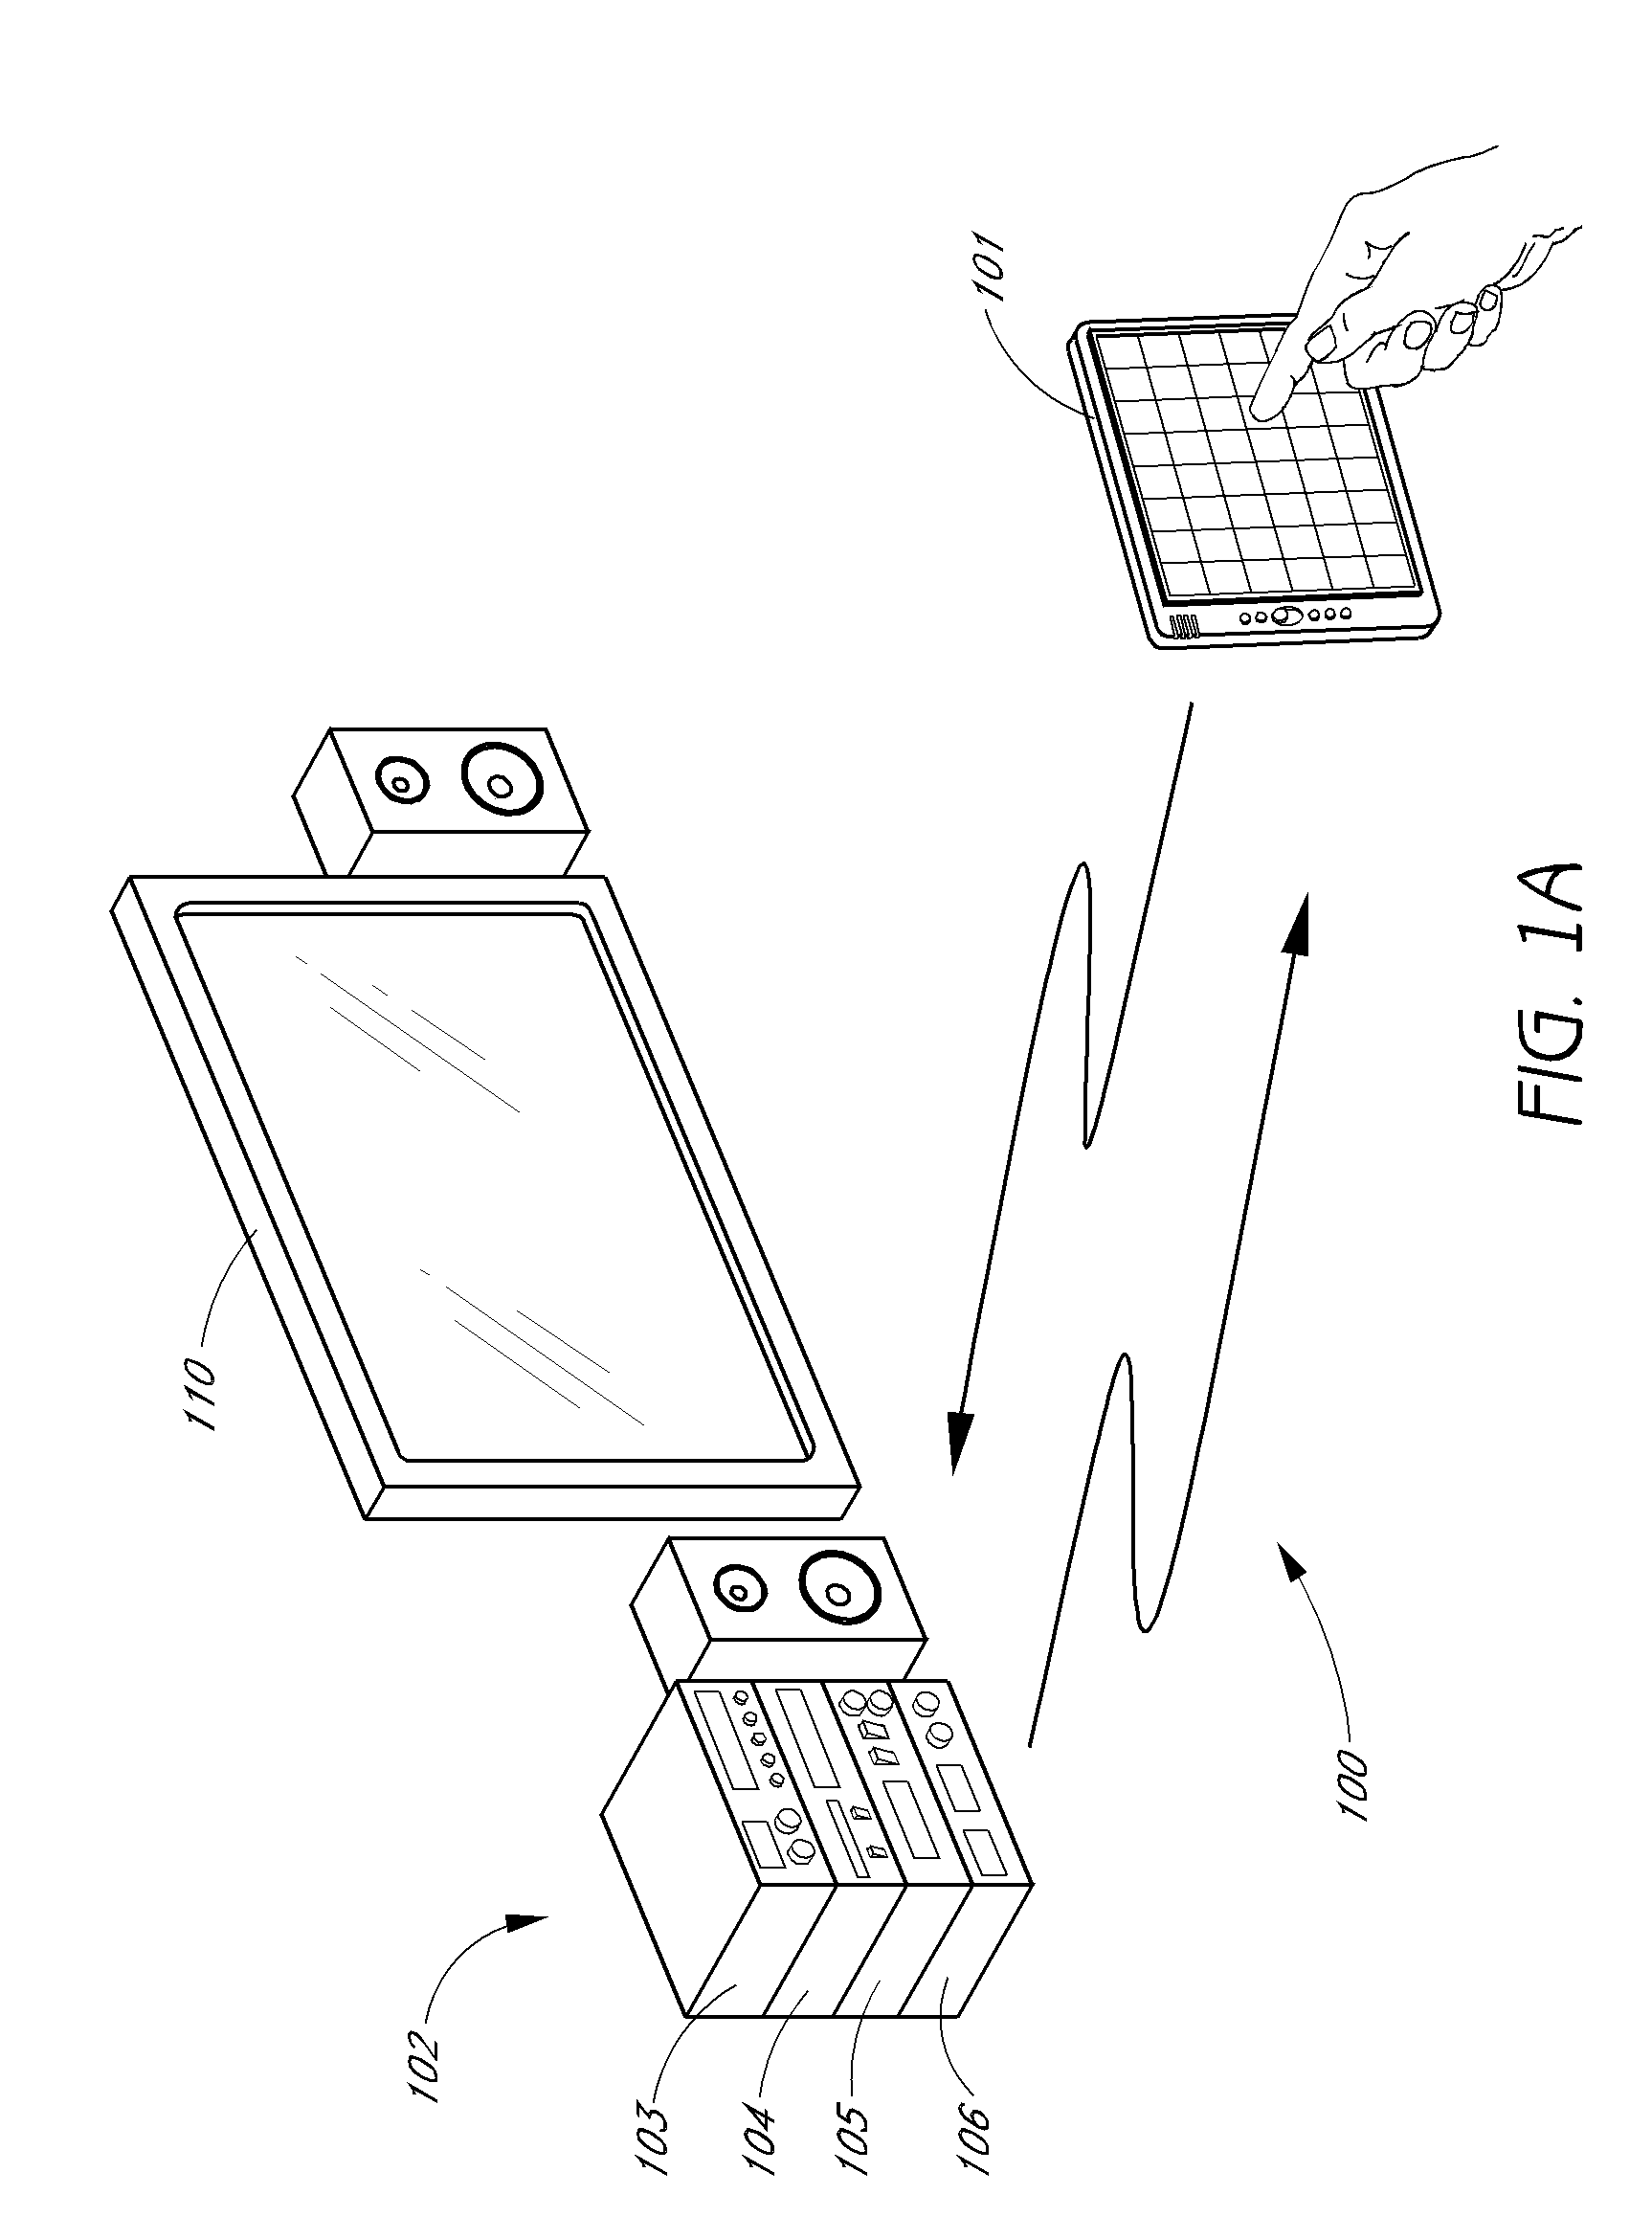 Touch-screen remote control for multimedia equipment